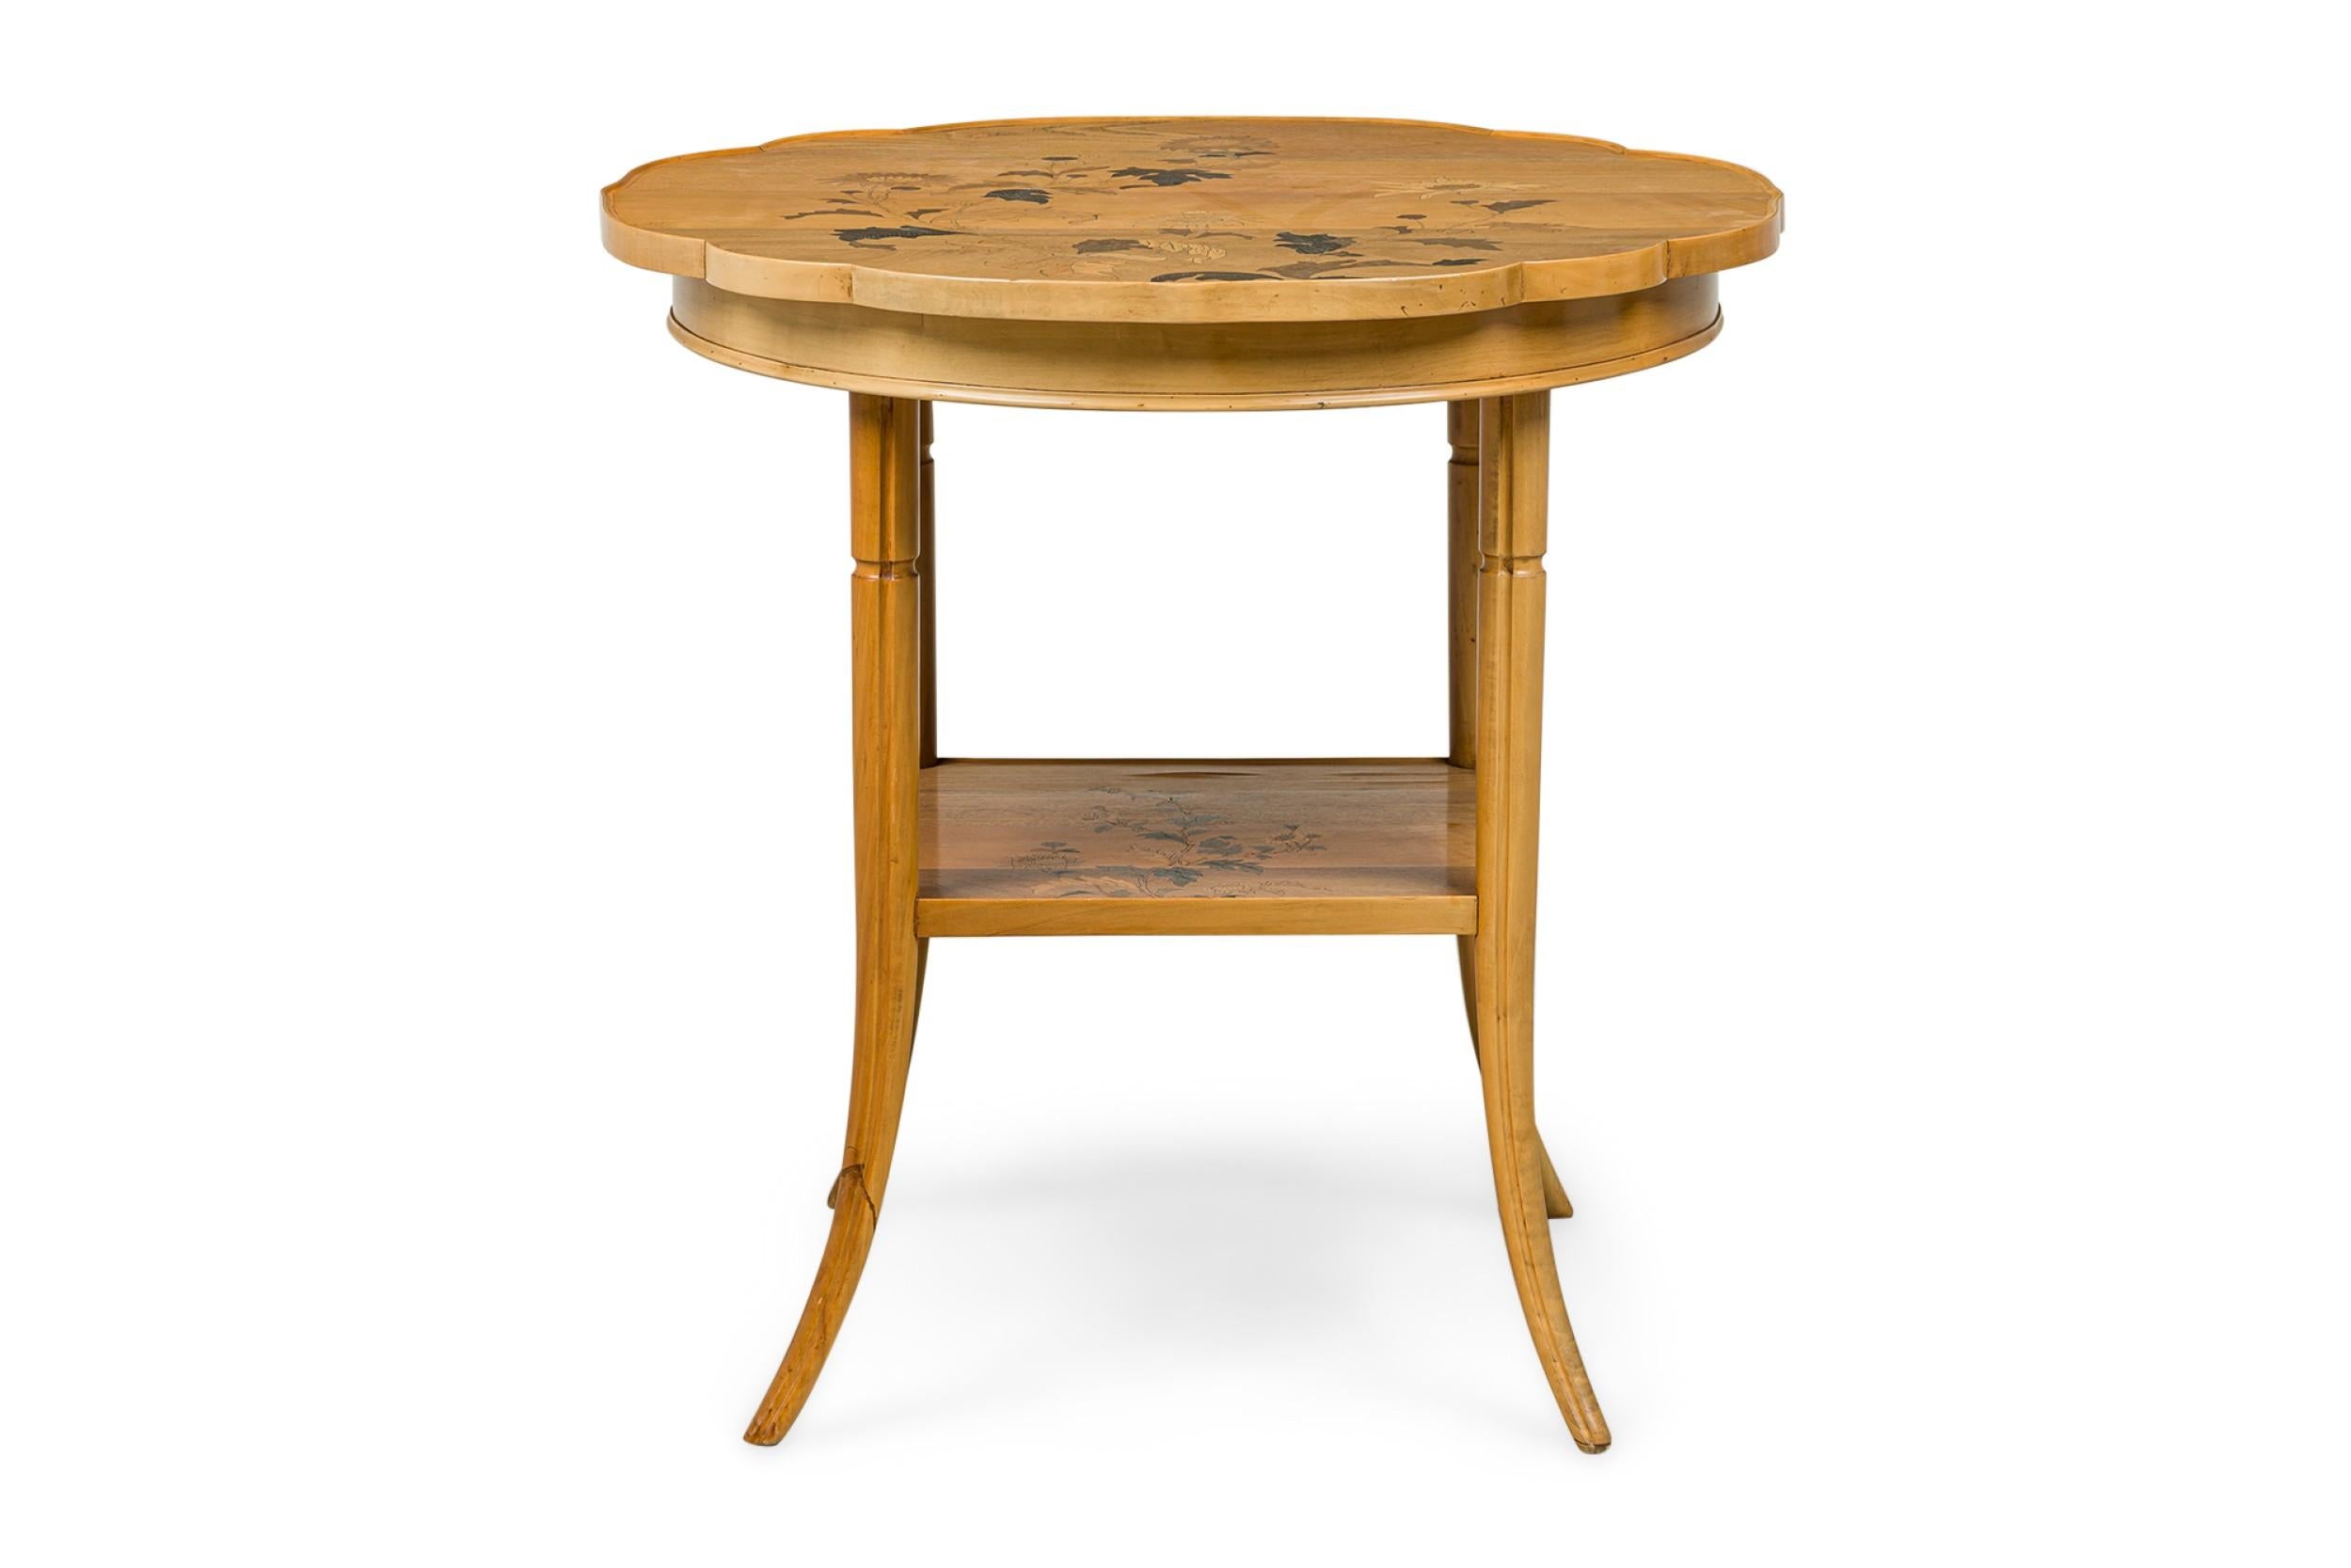 French Art Nouveau occasional table with a circular top with shaped edge and floral marquetry inlay that rotates on a central axis, resting on four tapered sabre legs joined by a square stretcher with floral marquetry inlay. (EMILE GALLE)
 

 Minor